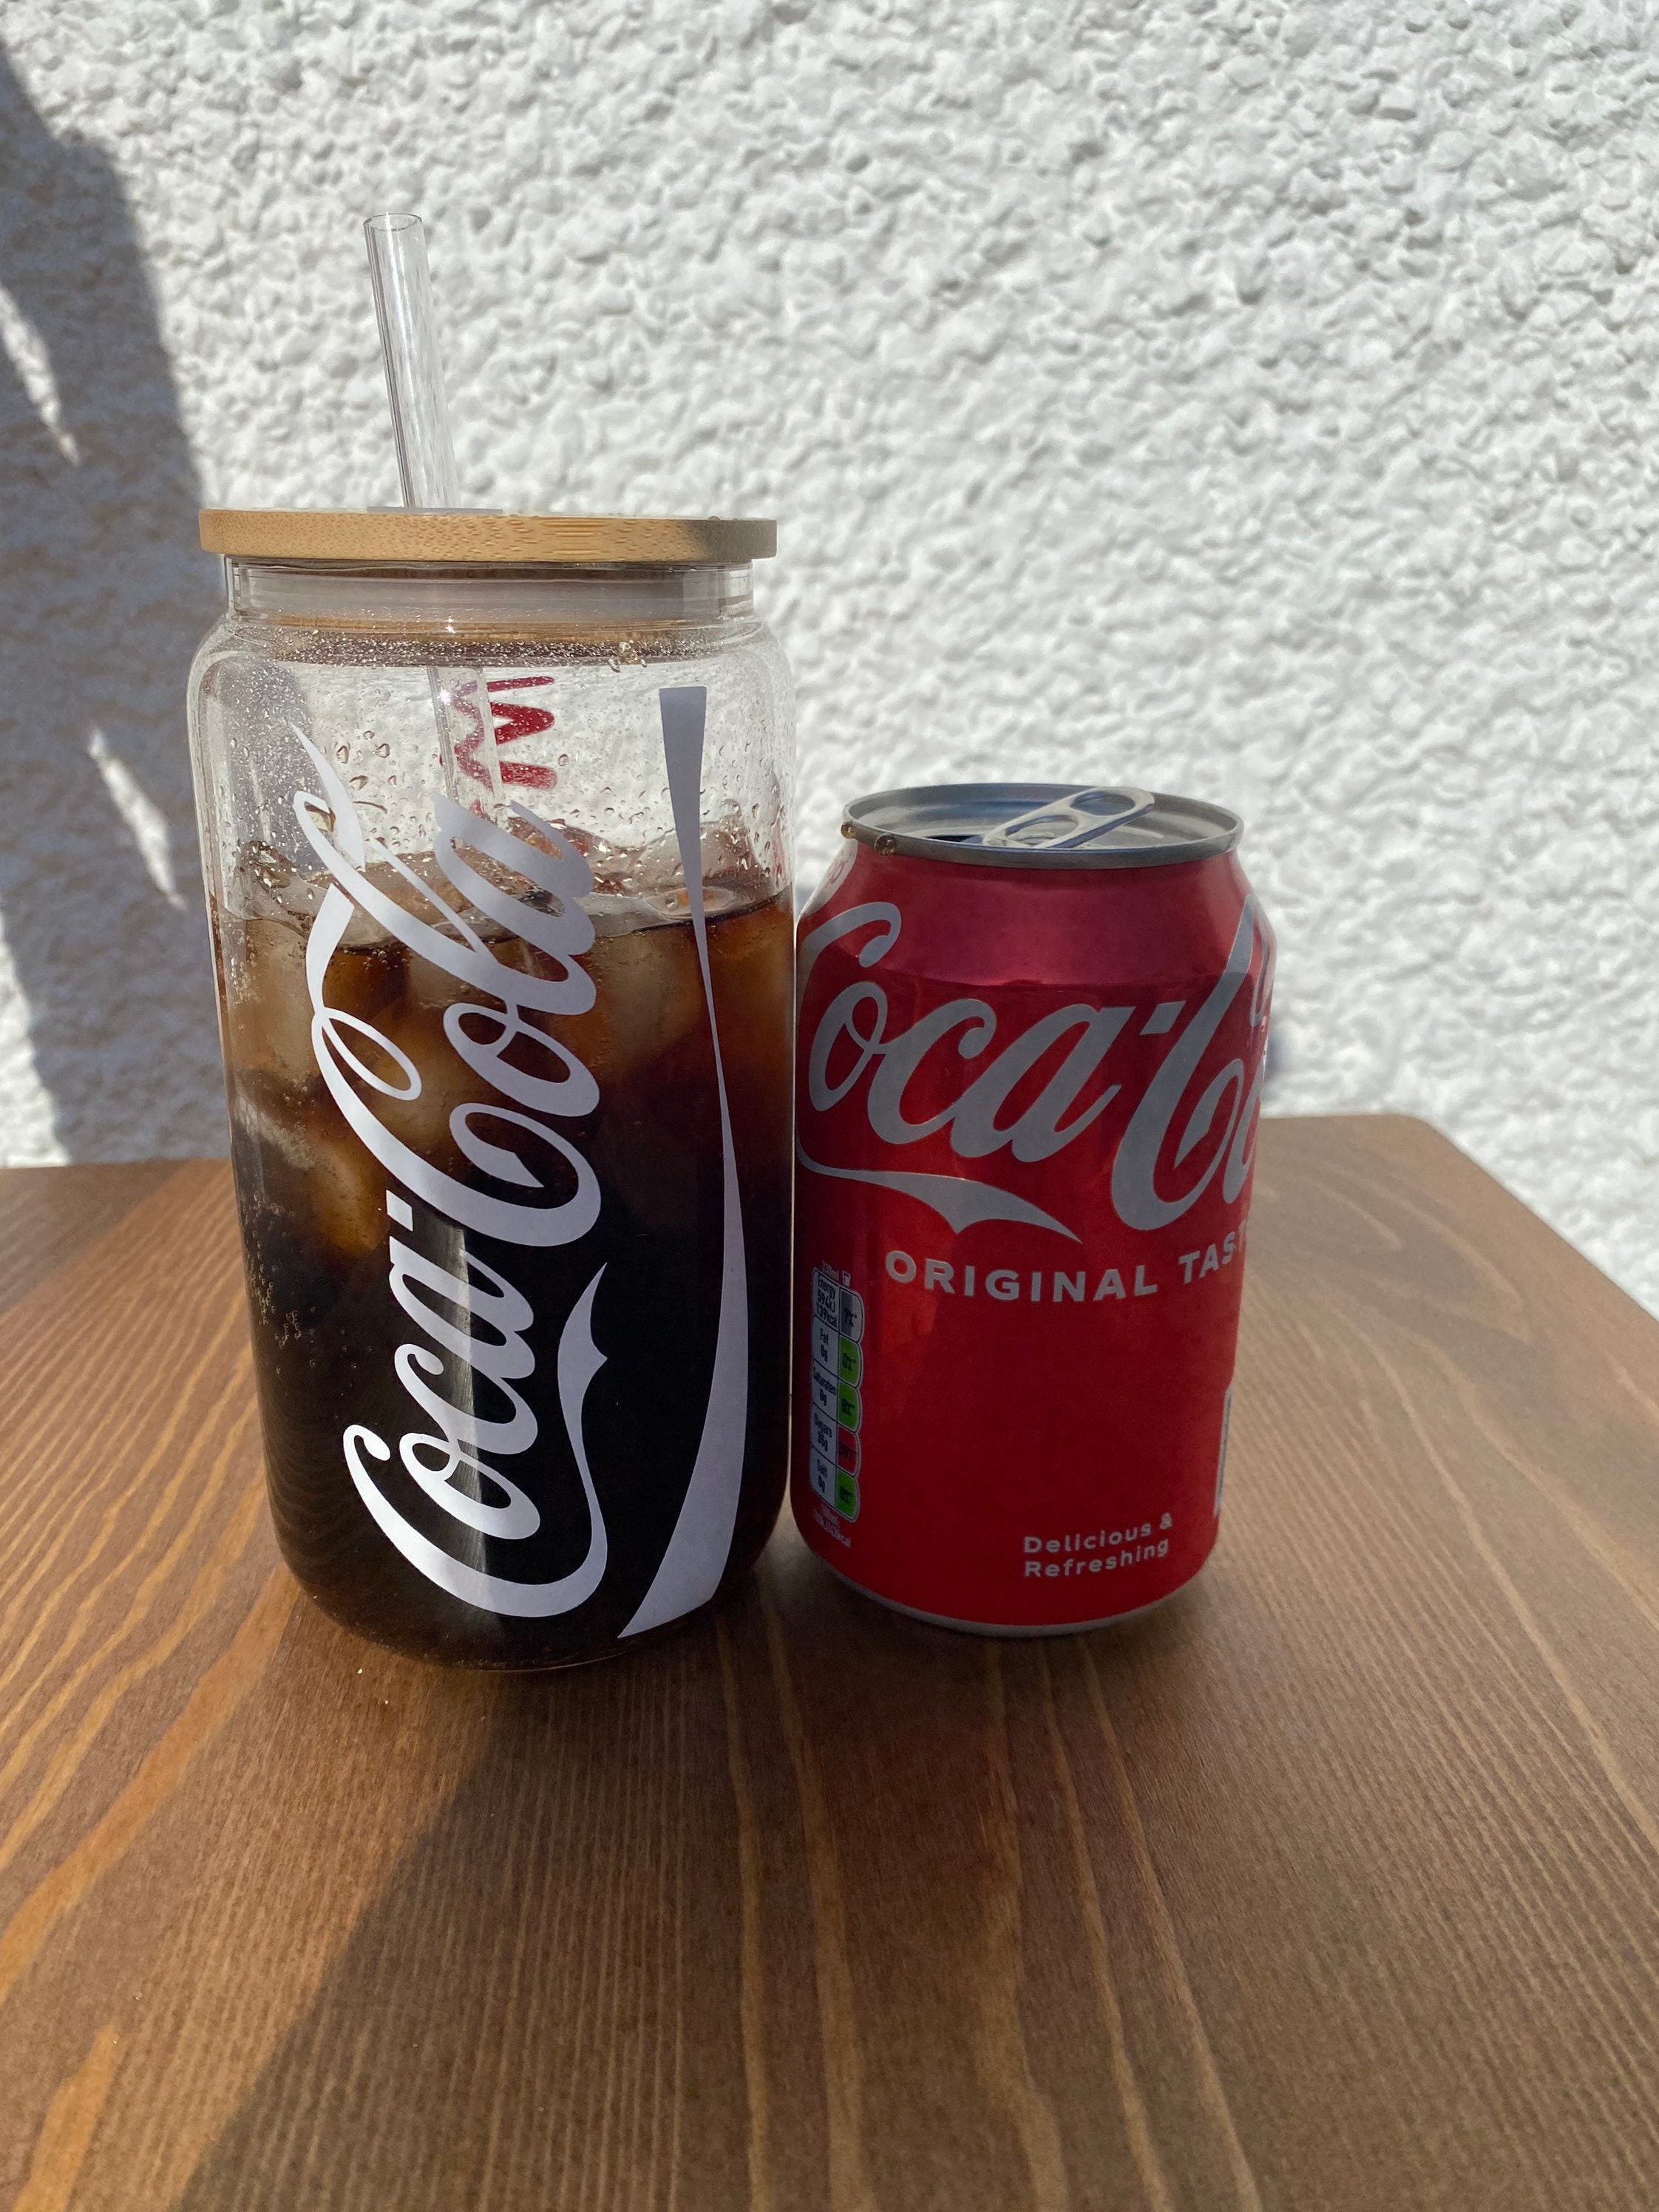 Set of 2 Classic Coke/Coca Cola Glasses 17 ounces-hint of green glass is  beautiful and feels good in the hand